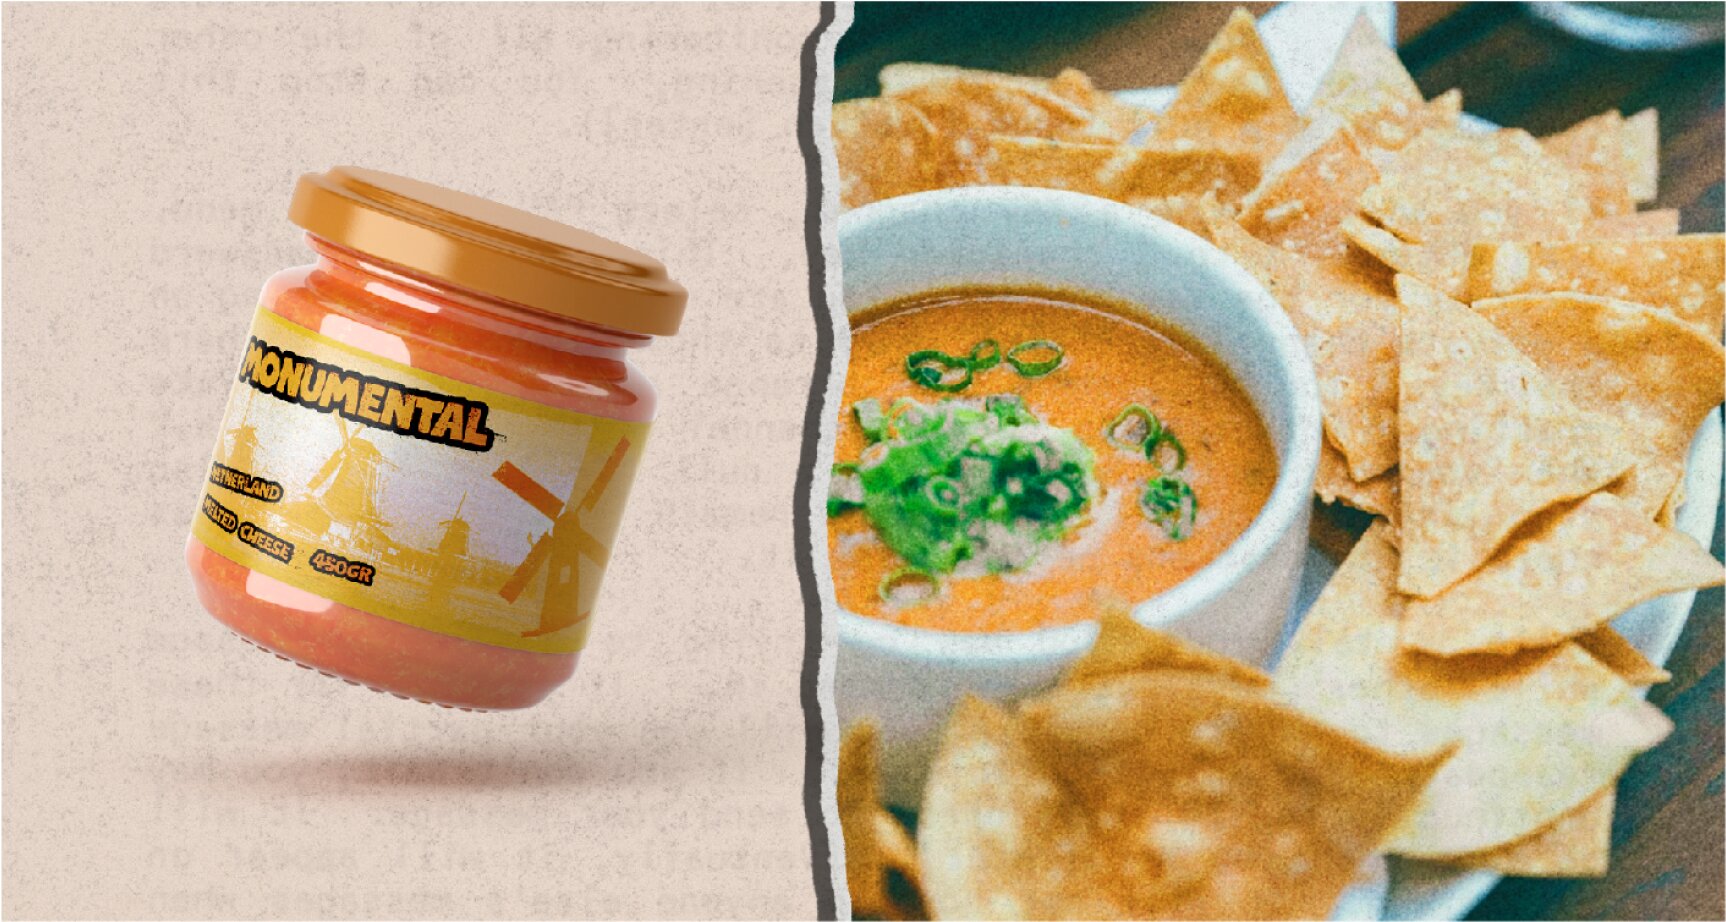 2 images. Left side orange sauce jar. Rigth side, sauce dip with nachos around in a plate